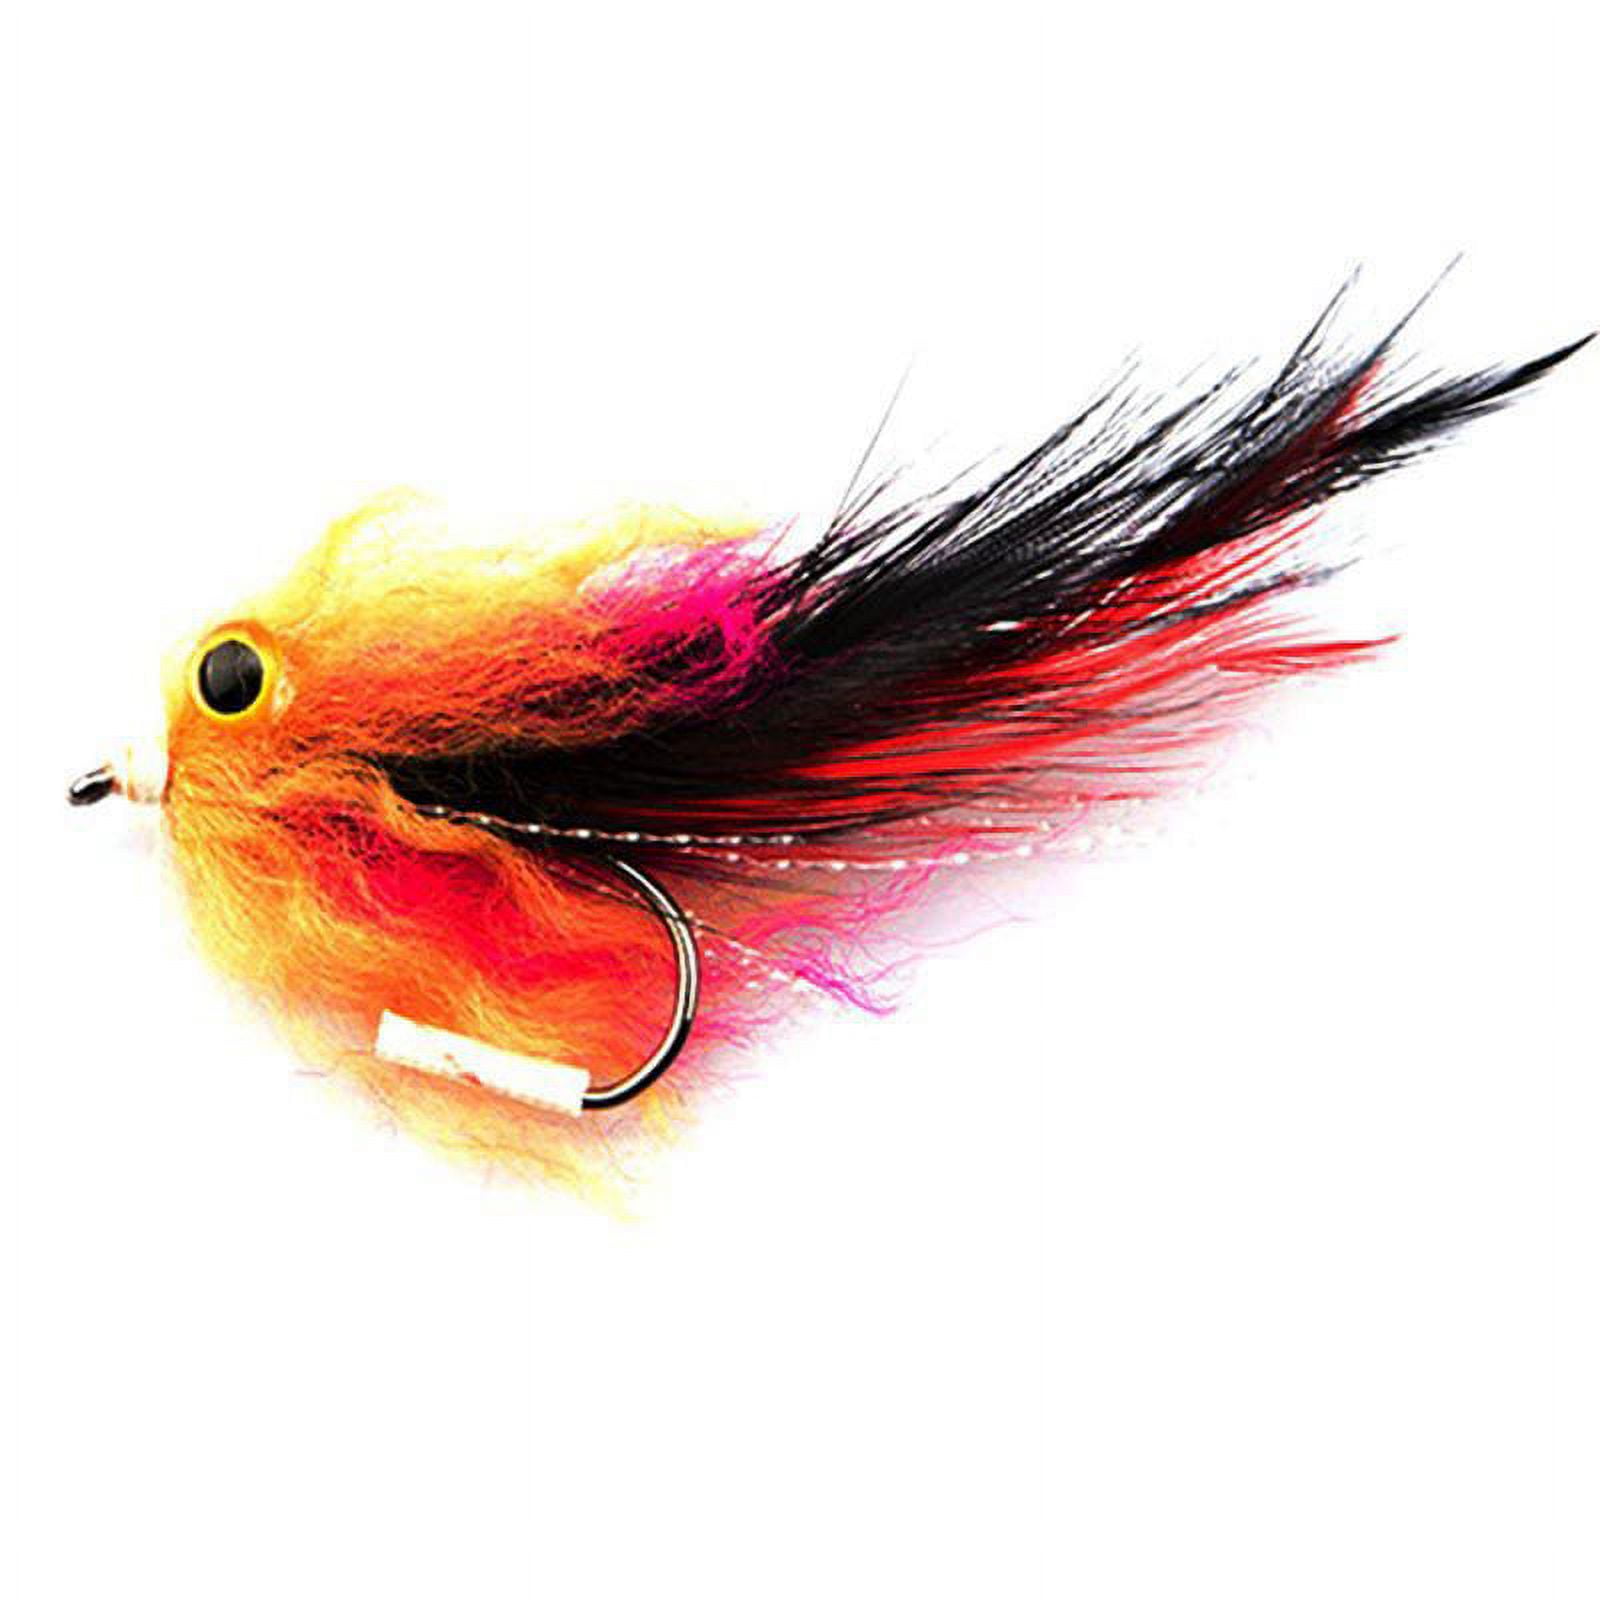 1pcs/bag New Trout Salmon Pike Streamer Fly for Fly Fishing Flies Size 4#  Hook 